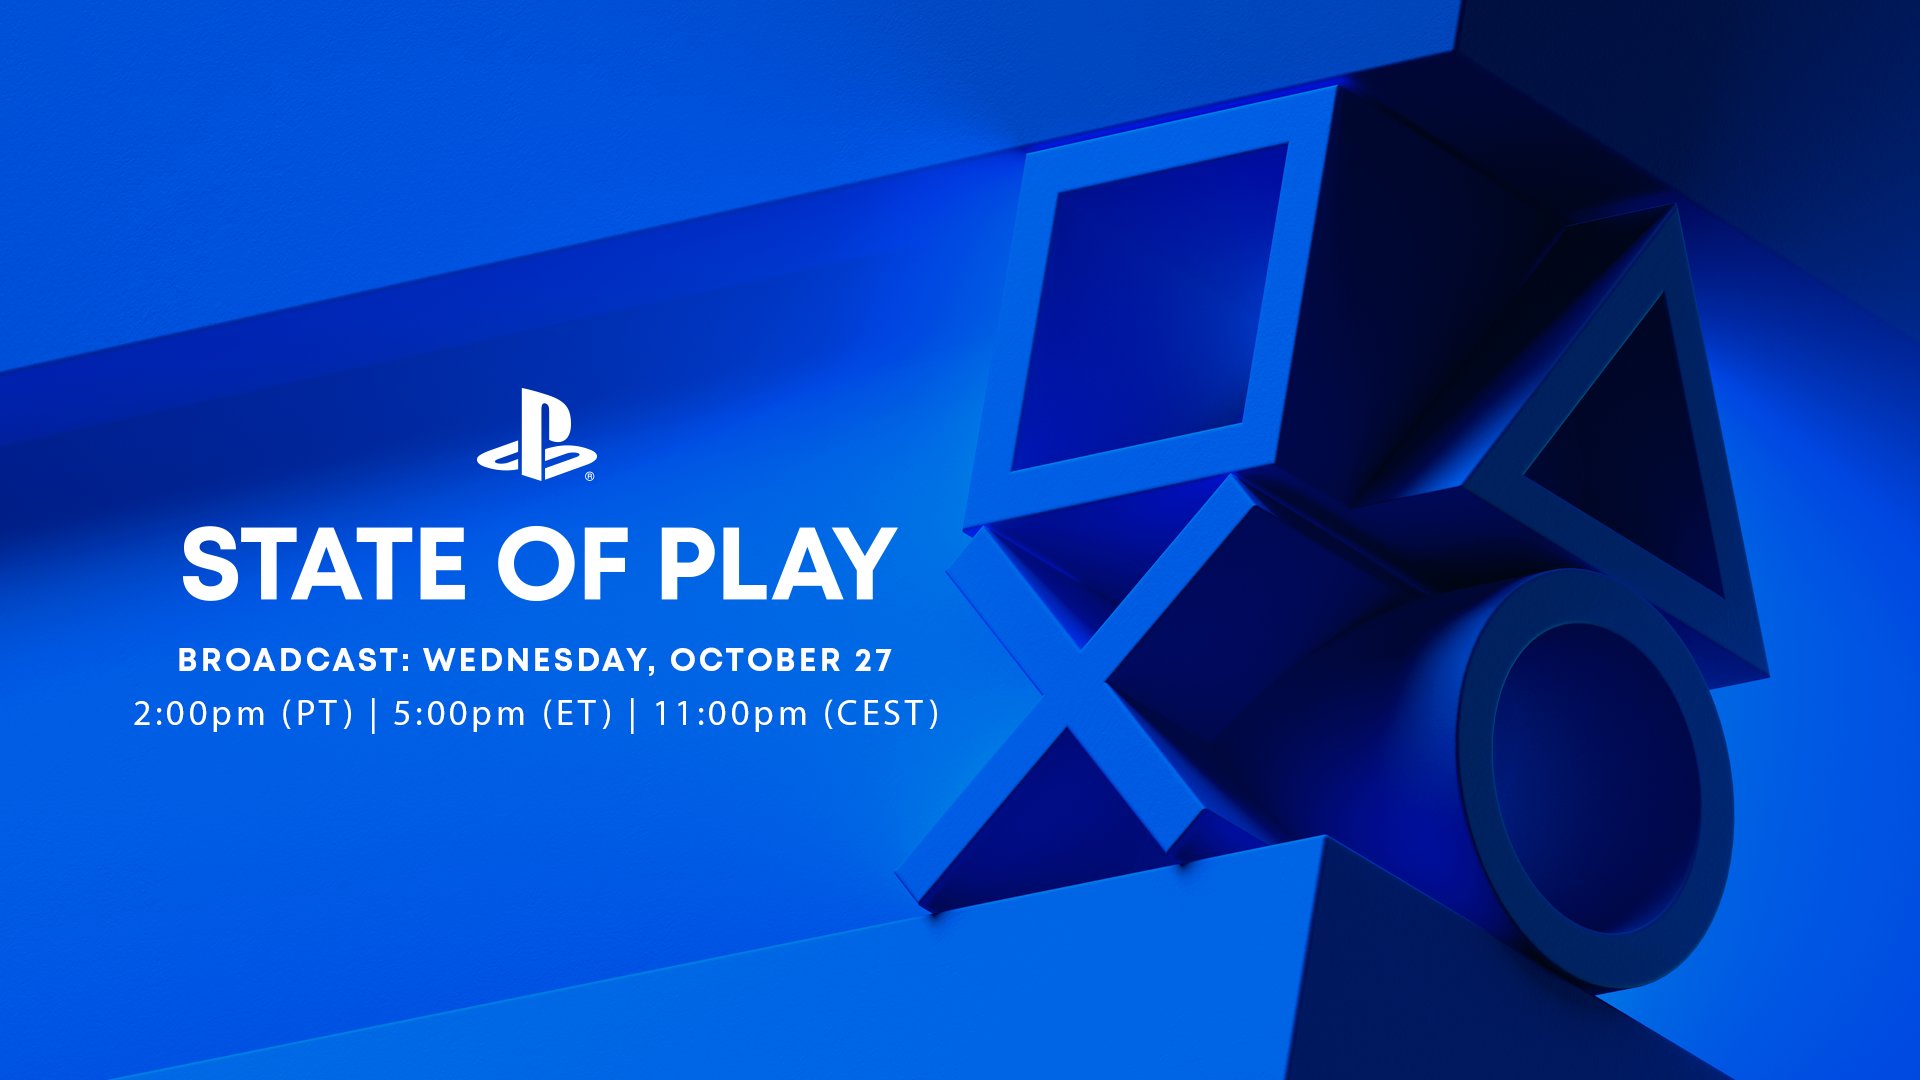 State of Play returns with a new broadcast focused on third parties: date  and time of the event - Meristation